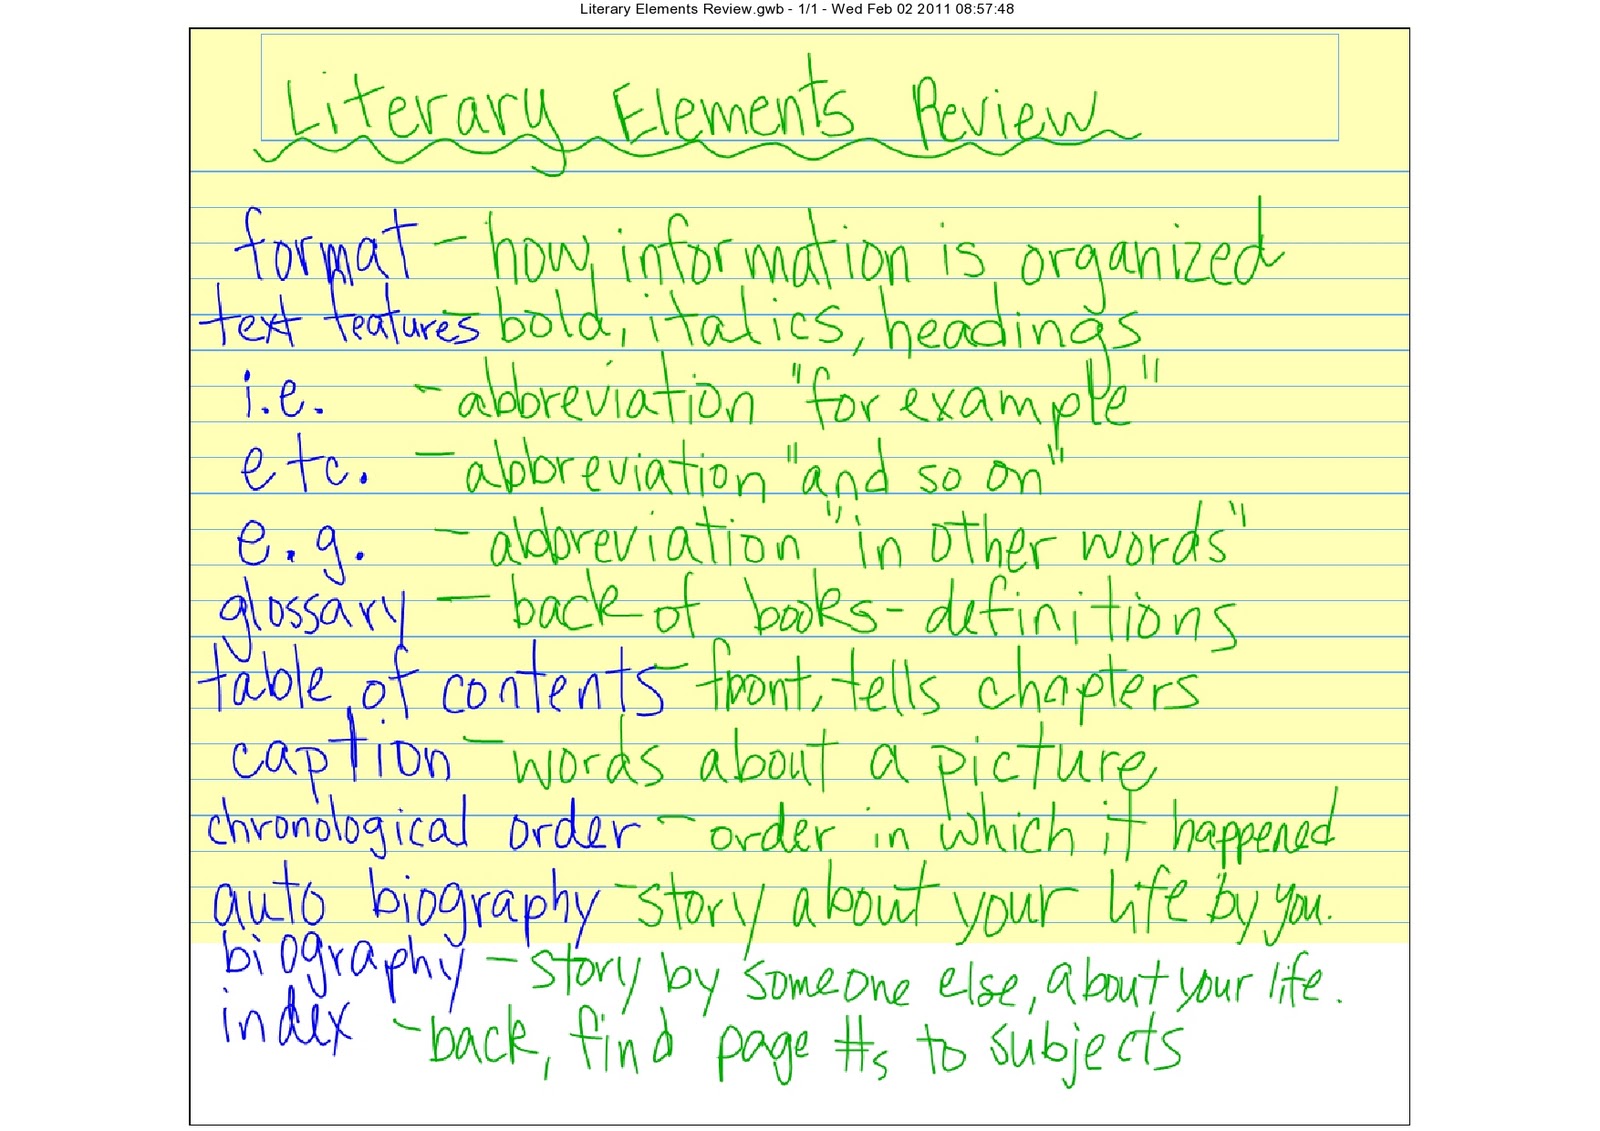 Six Elements Of A Literature Review On